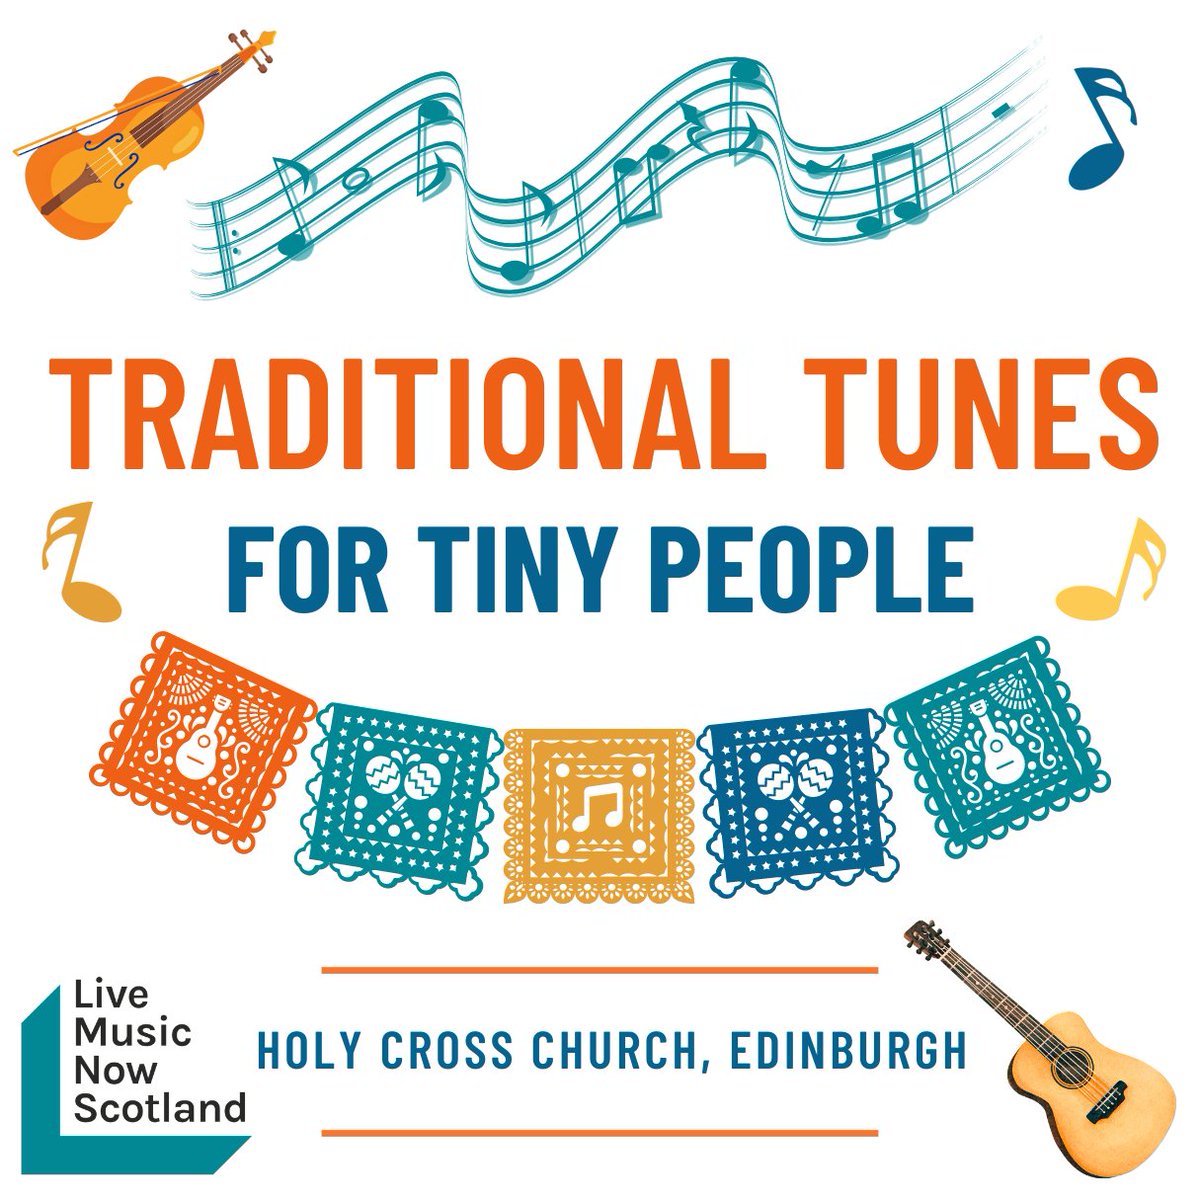 Join us for free storytelling and song sessions, as 'Traditional Tunes for Tiny People' returns to Holy Cross in Edinburgh this month! A lovely opportunity for the wee ones, and their grown-ups, to sing and dance along to traditional songs and tunes. holycrossedinburgh.org/event/free-fam…